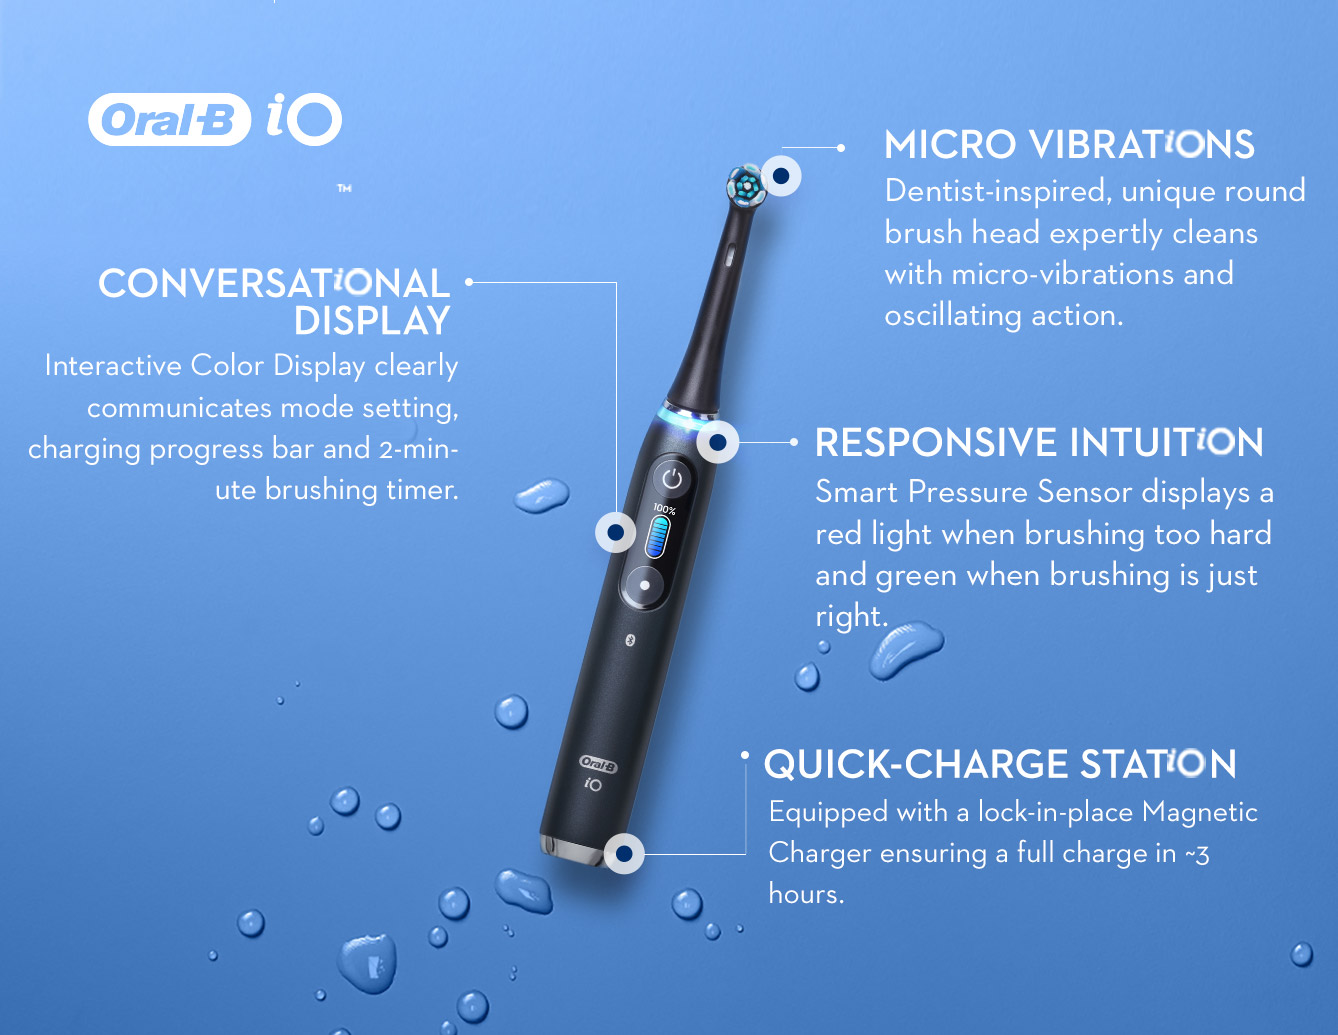 Oral-B iO Series 9 black onyx electric toothbrush features explained via hotspots